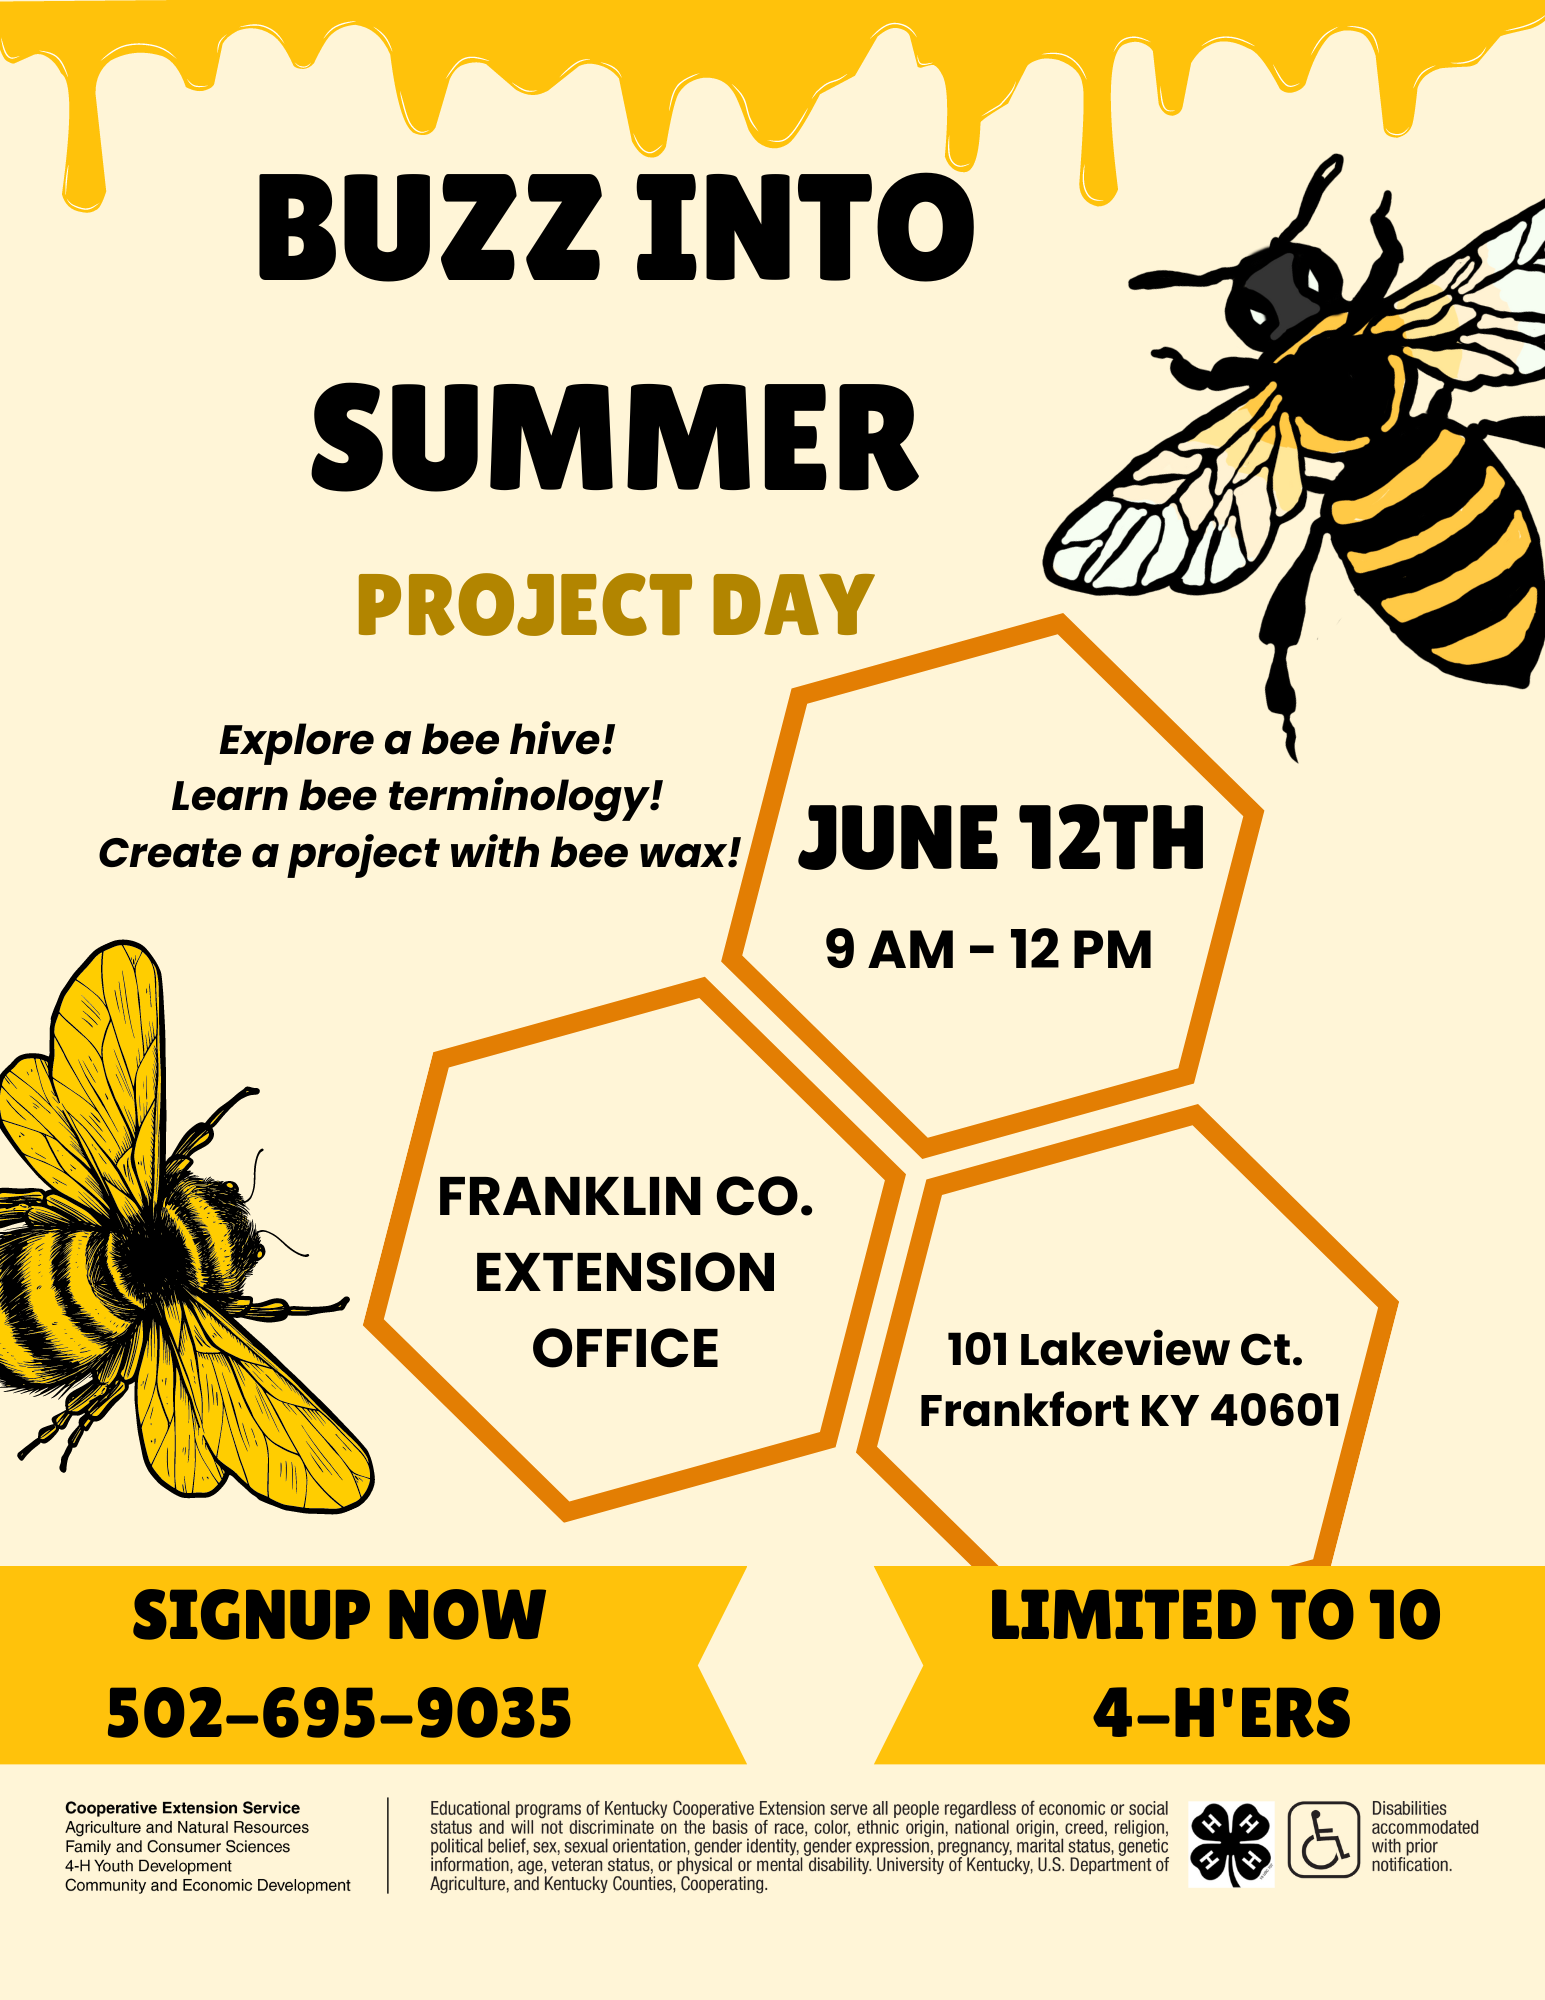 Buzz into Summer Project day flyer